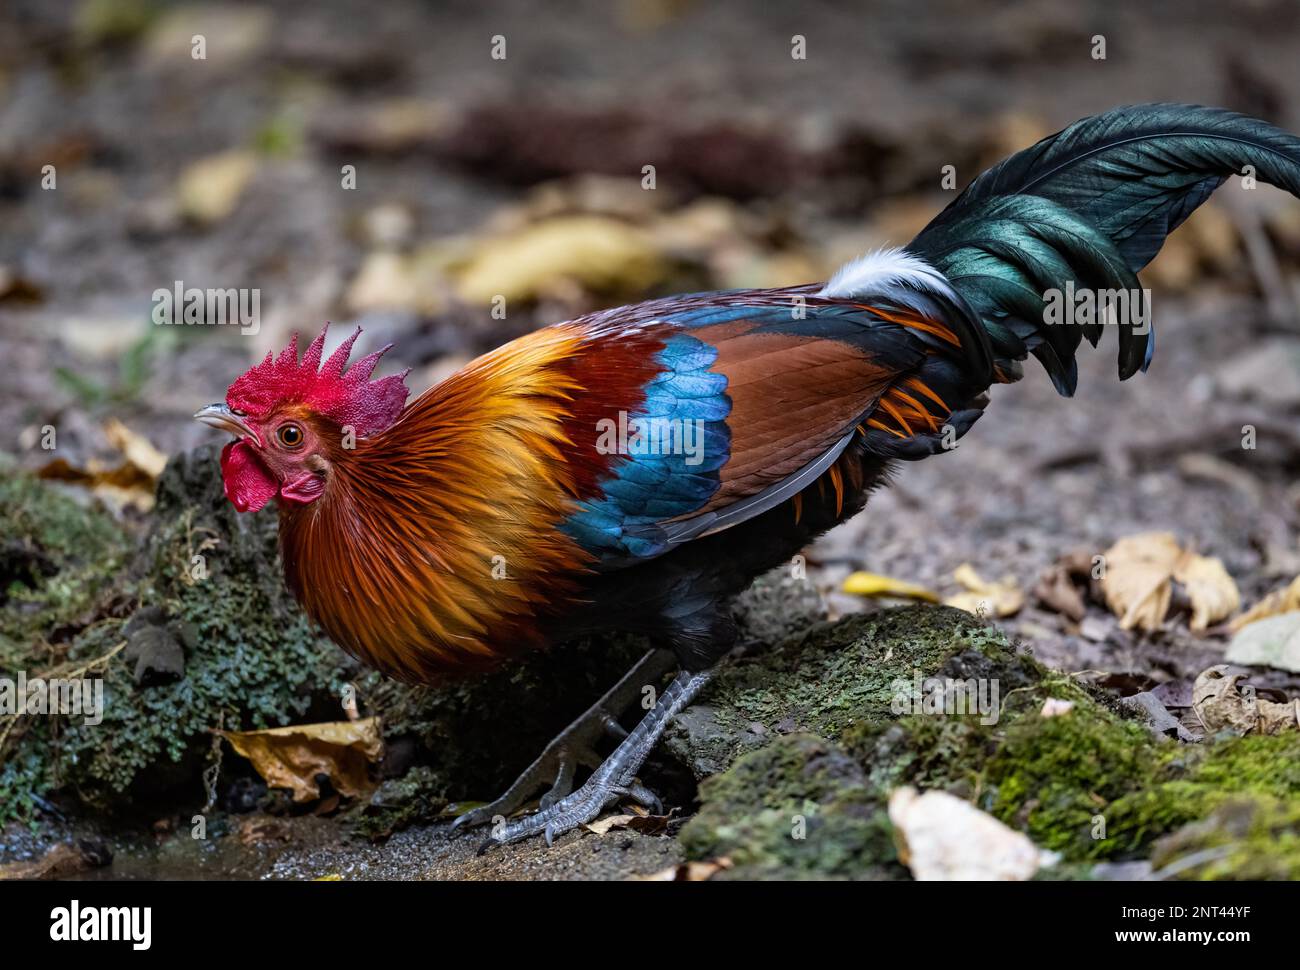 A wild male Red Junglefowl (Gallus gallus) drinking water at a waterhole. Thailand. Stock Photo